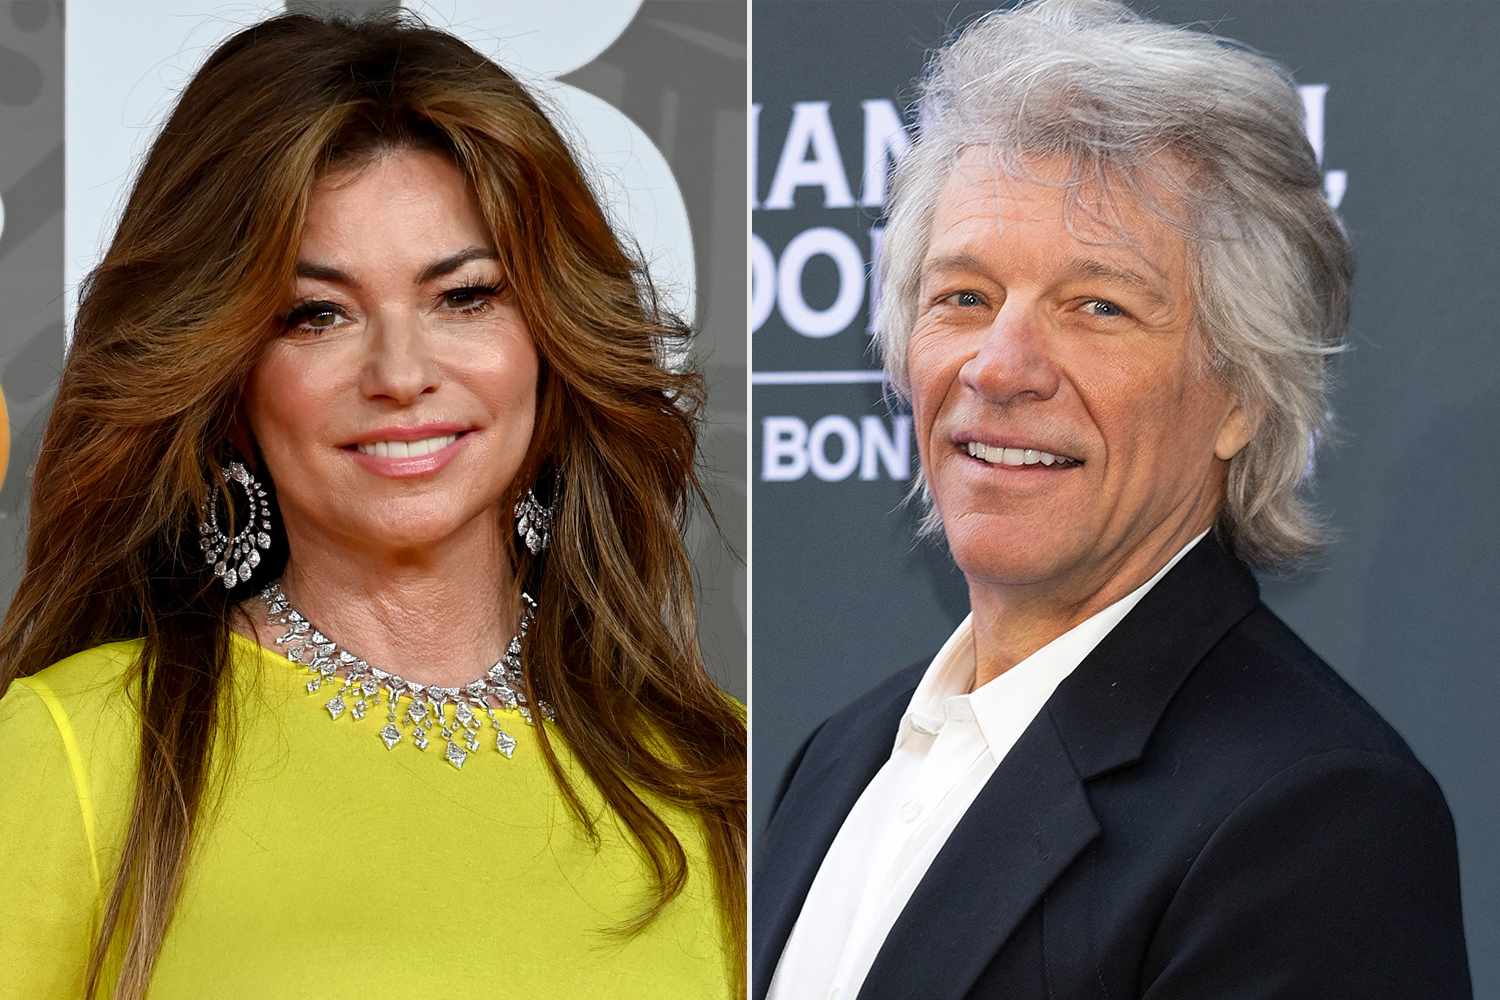 Shania Twain Reacts to Jon Bon Jovi Calling Her His 'Spirit Sister': 'It Just Warms My Heart' (Exclusive)